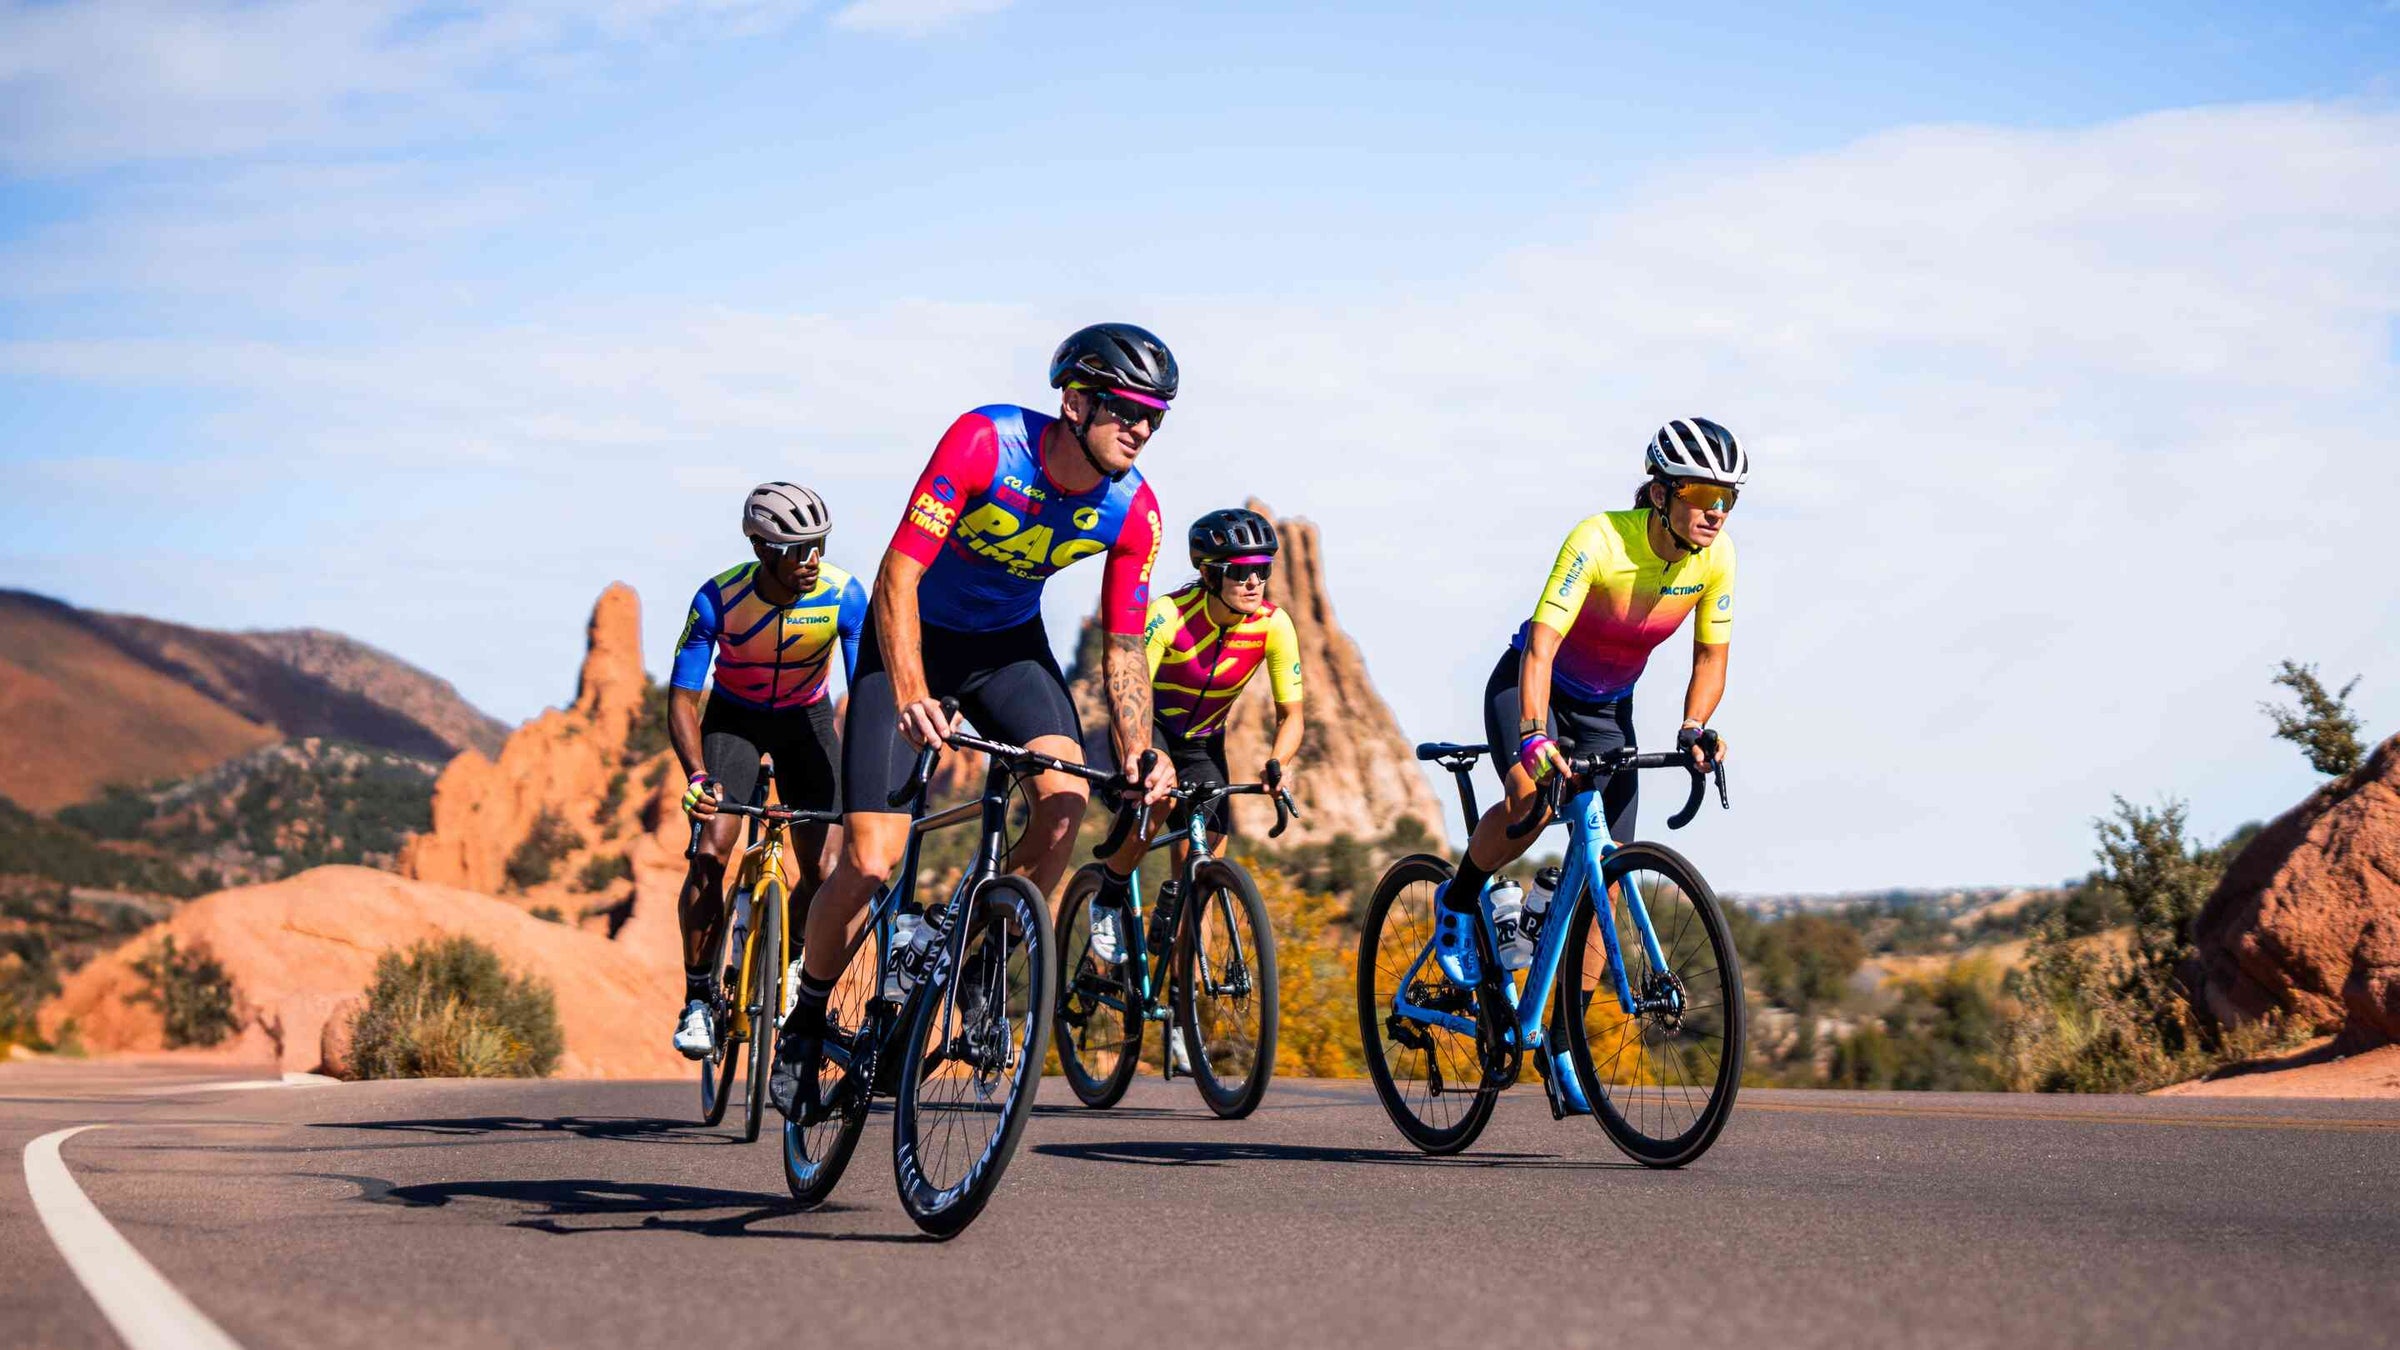 Cyclists in High-Viz Kits at Garden of the Gods